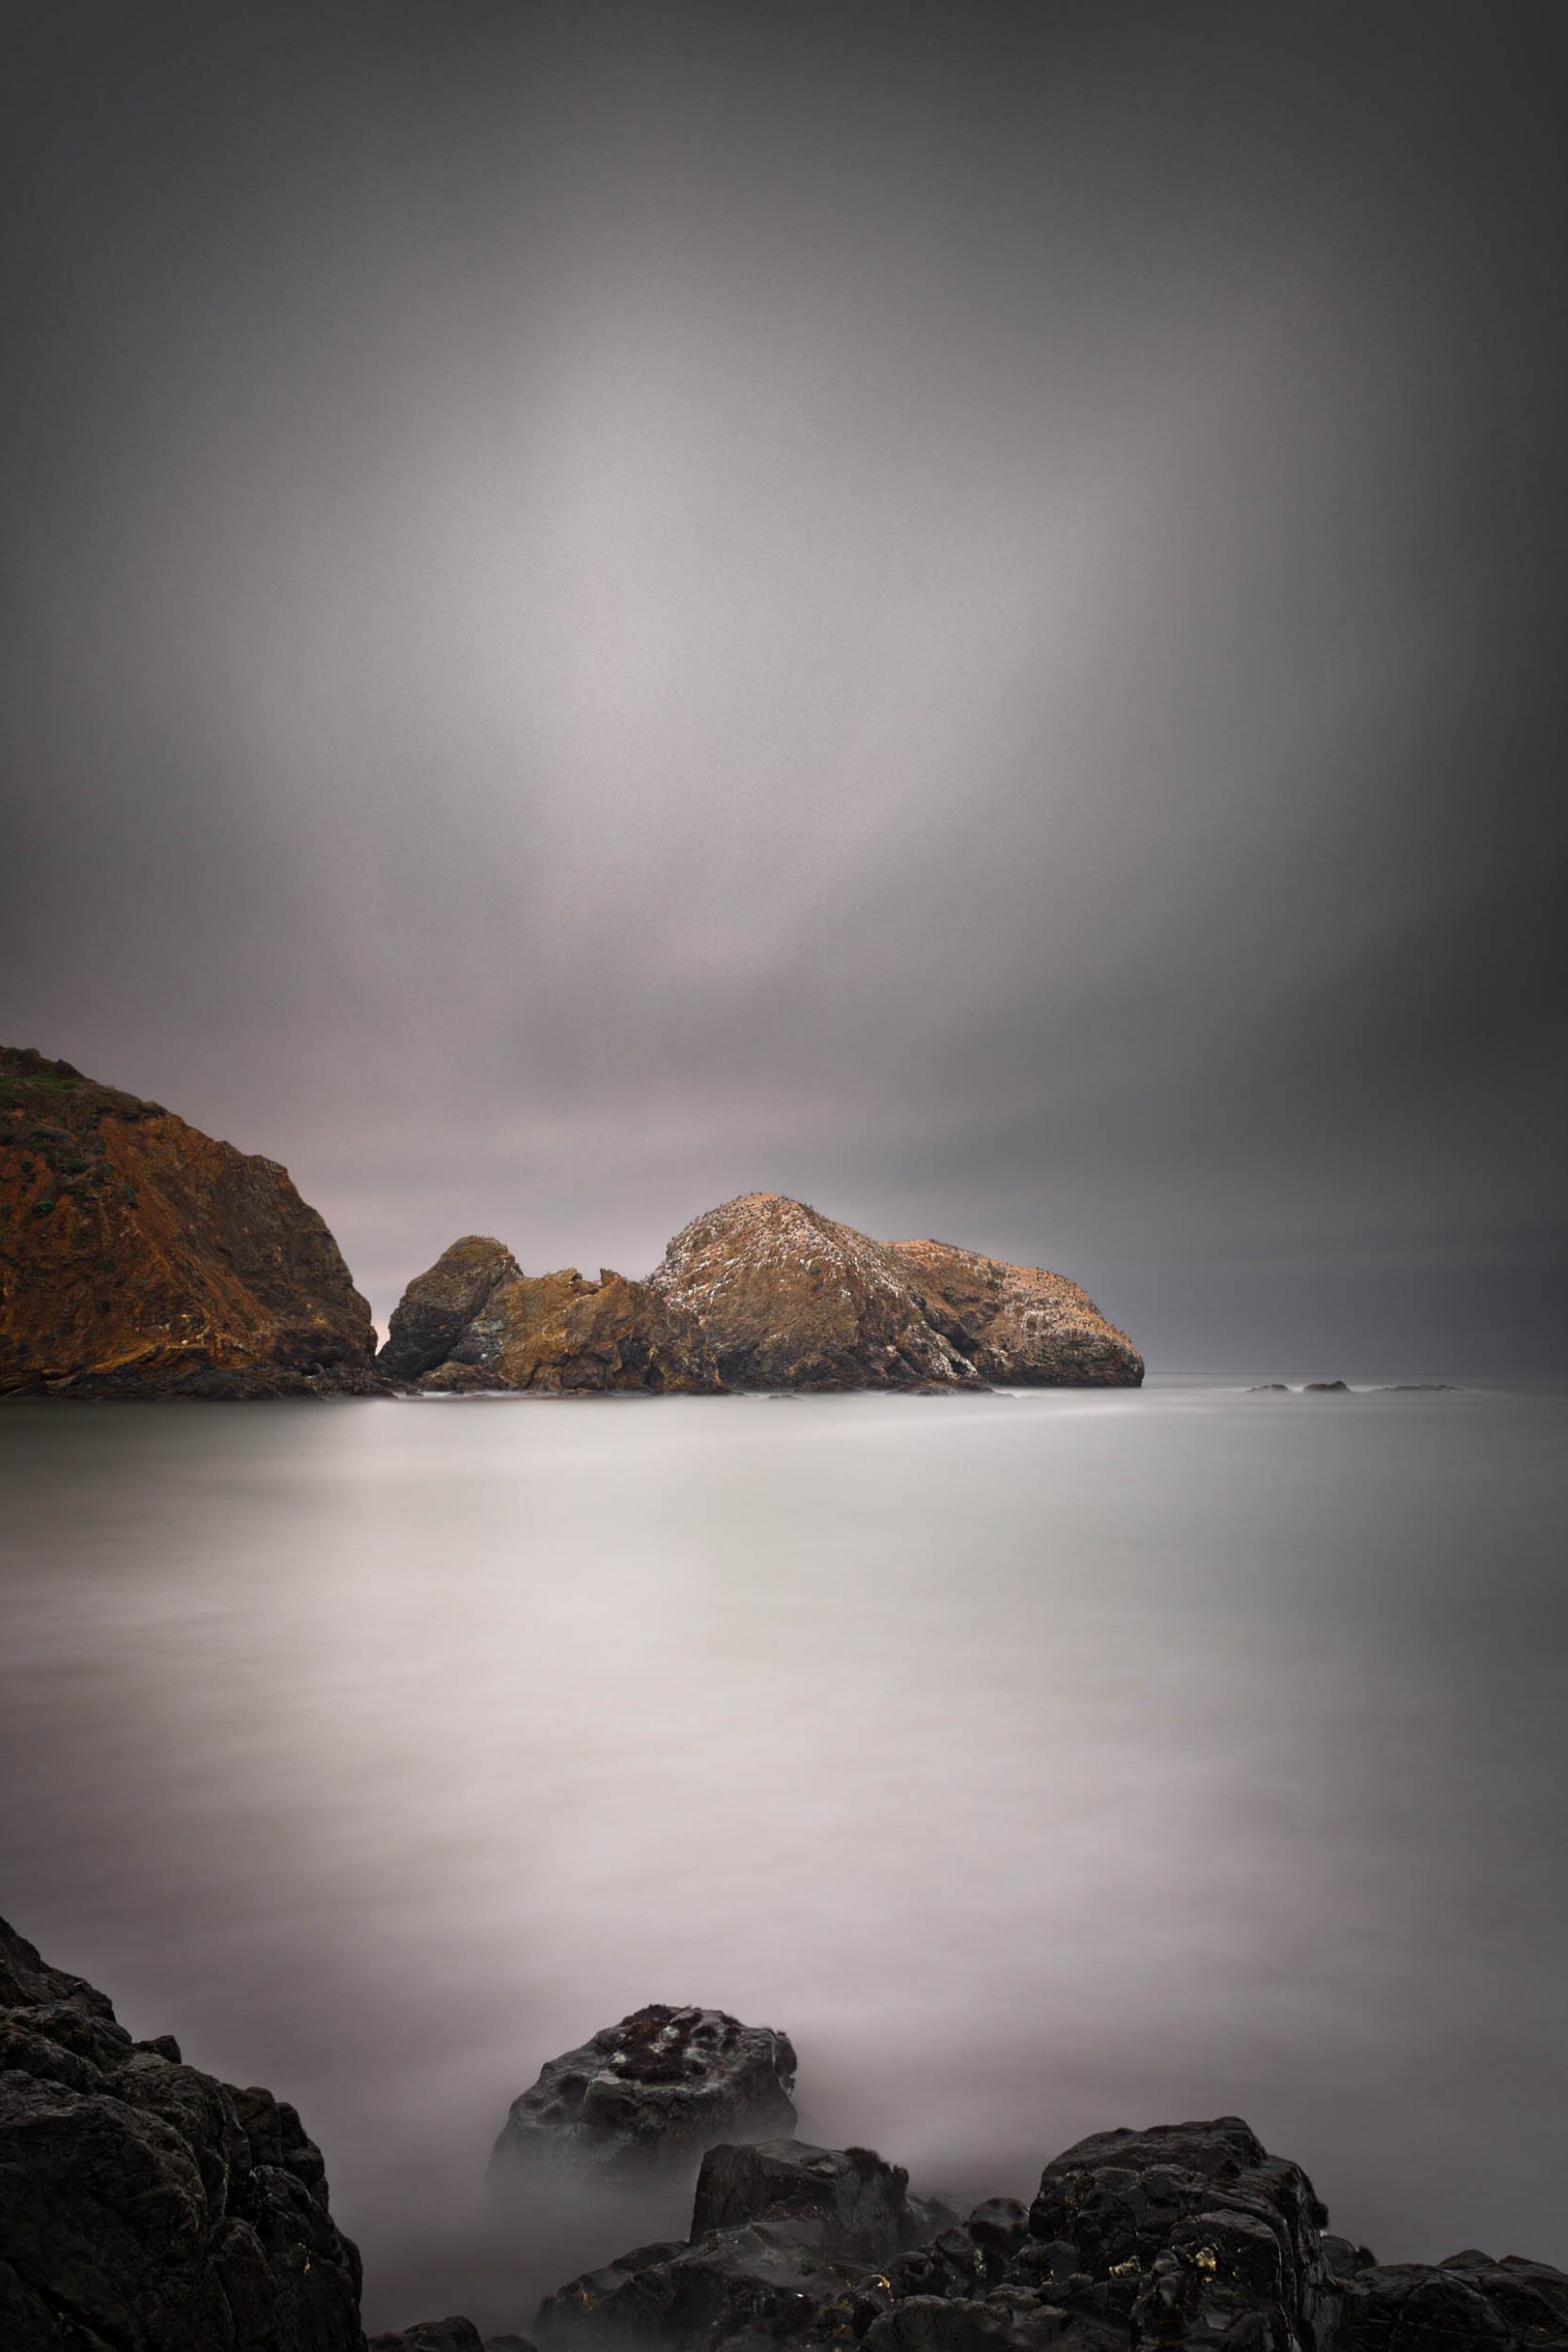 Rocks at Rodeo Beach, California with streaked clouds